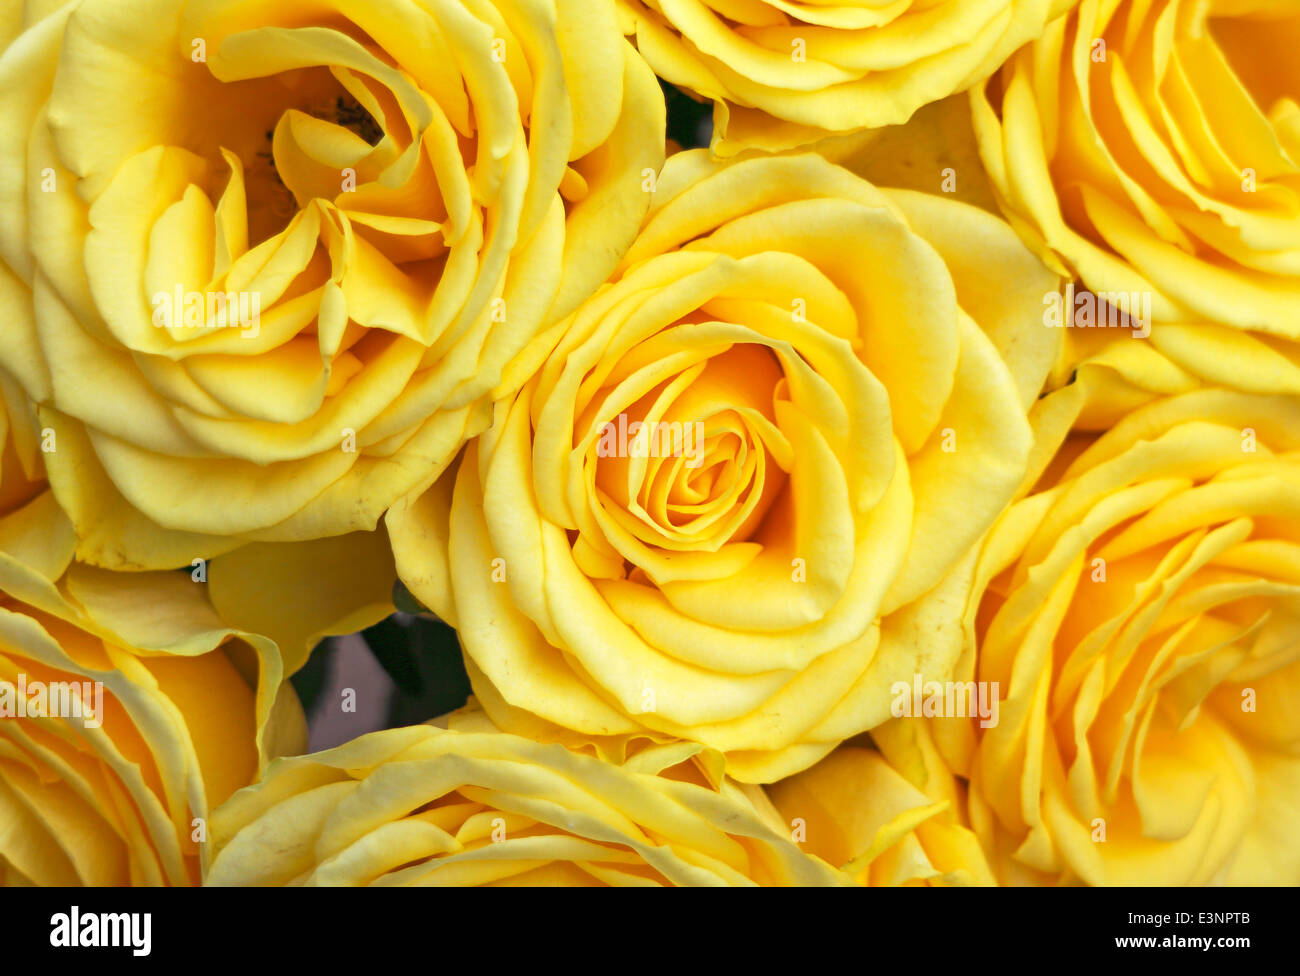 A still life close-up of a bunch of yellow roses. Stock Photo